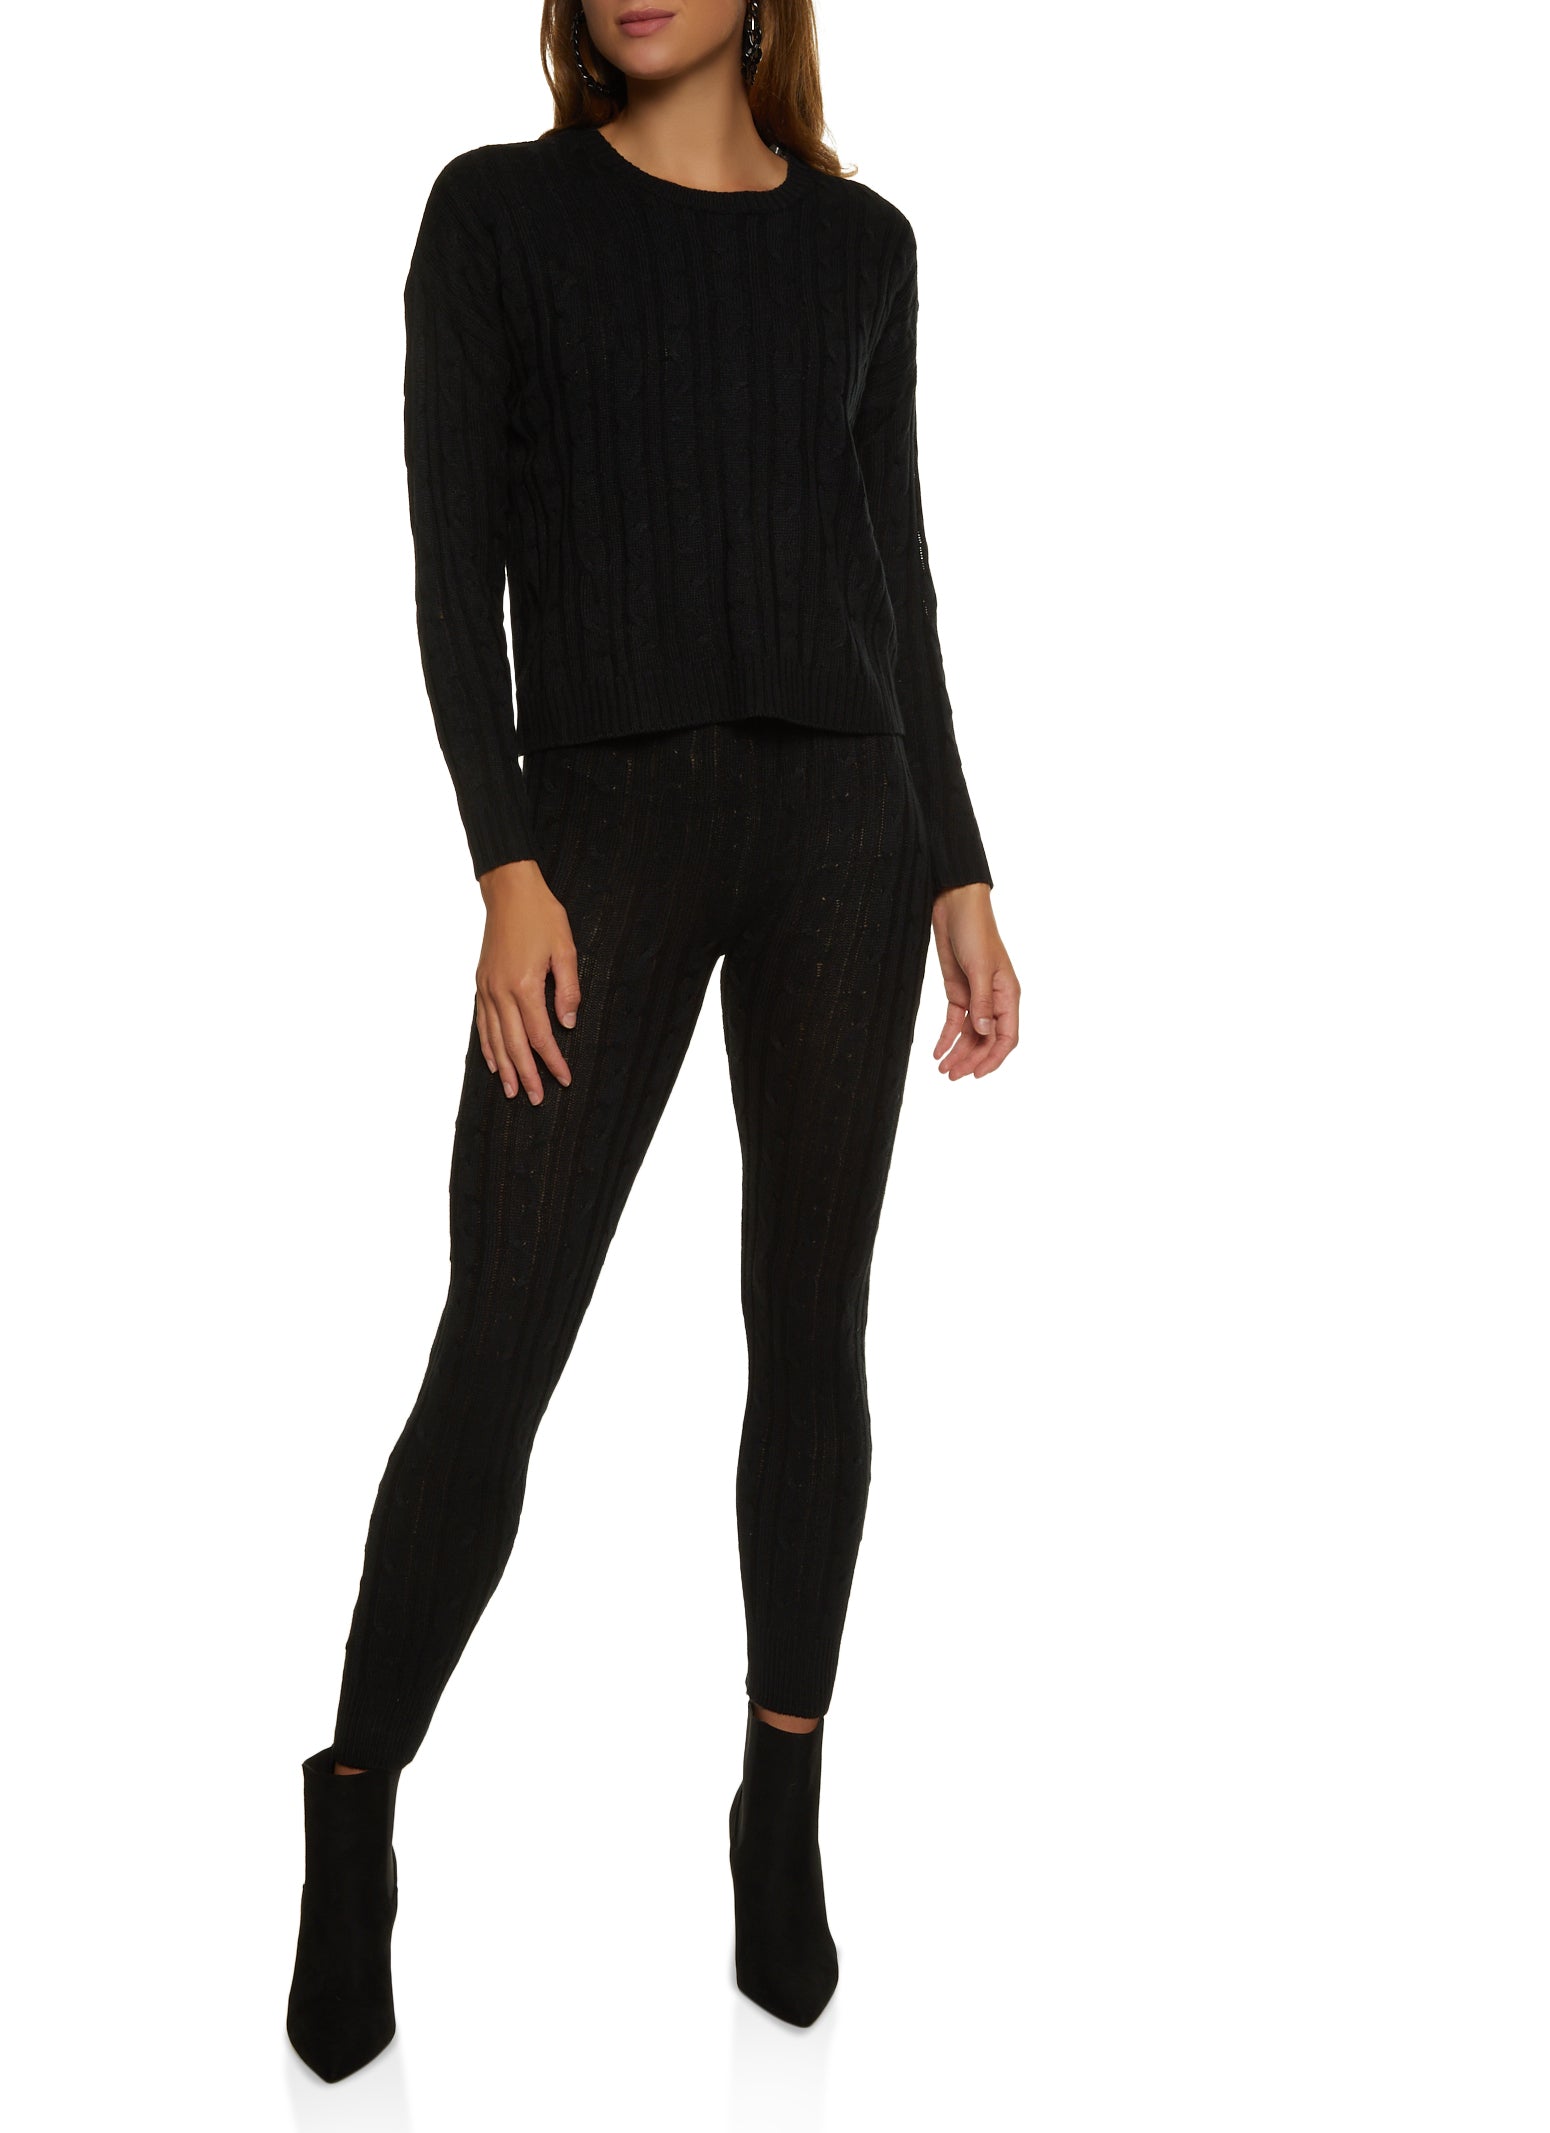 Cable Knit Crew Neck Sweater and Leggings Set - Black